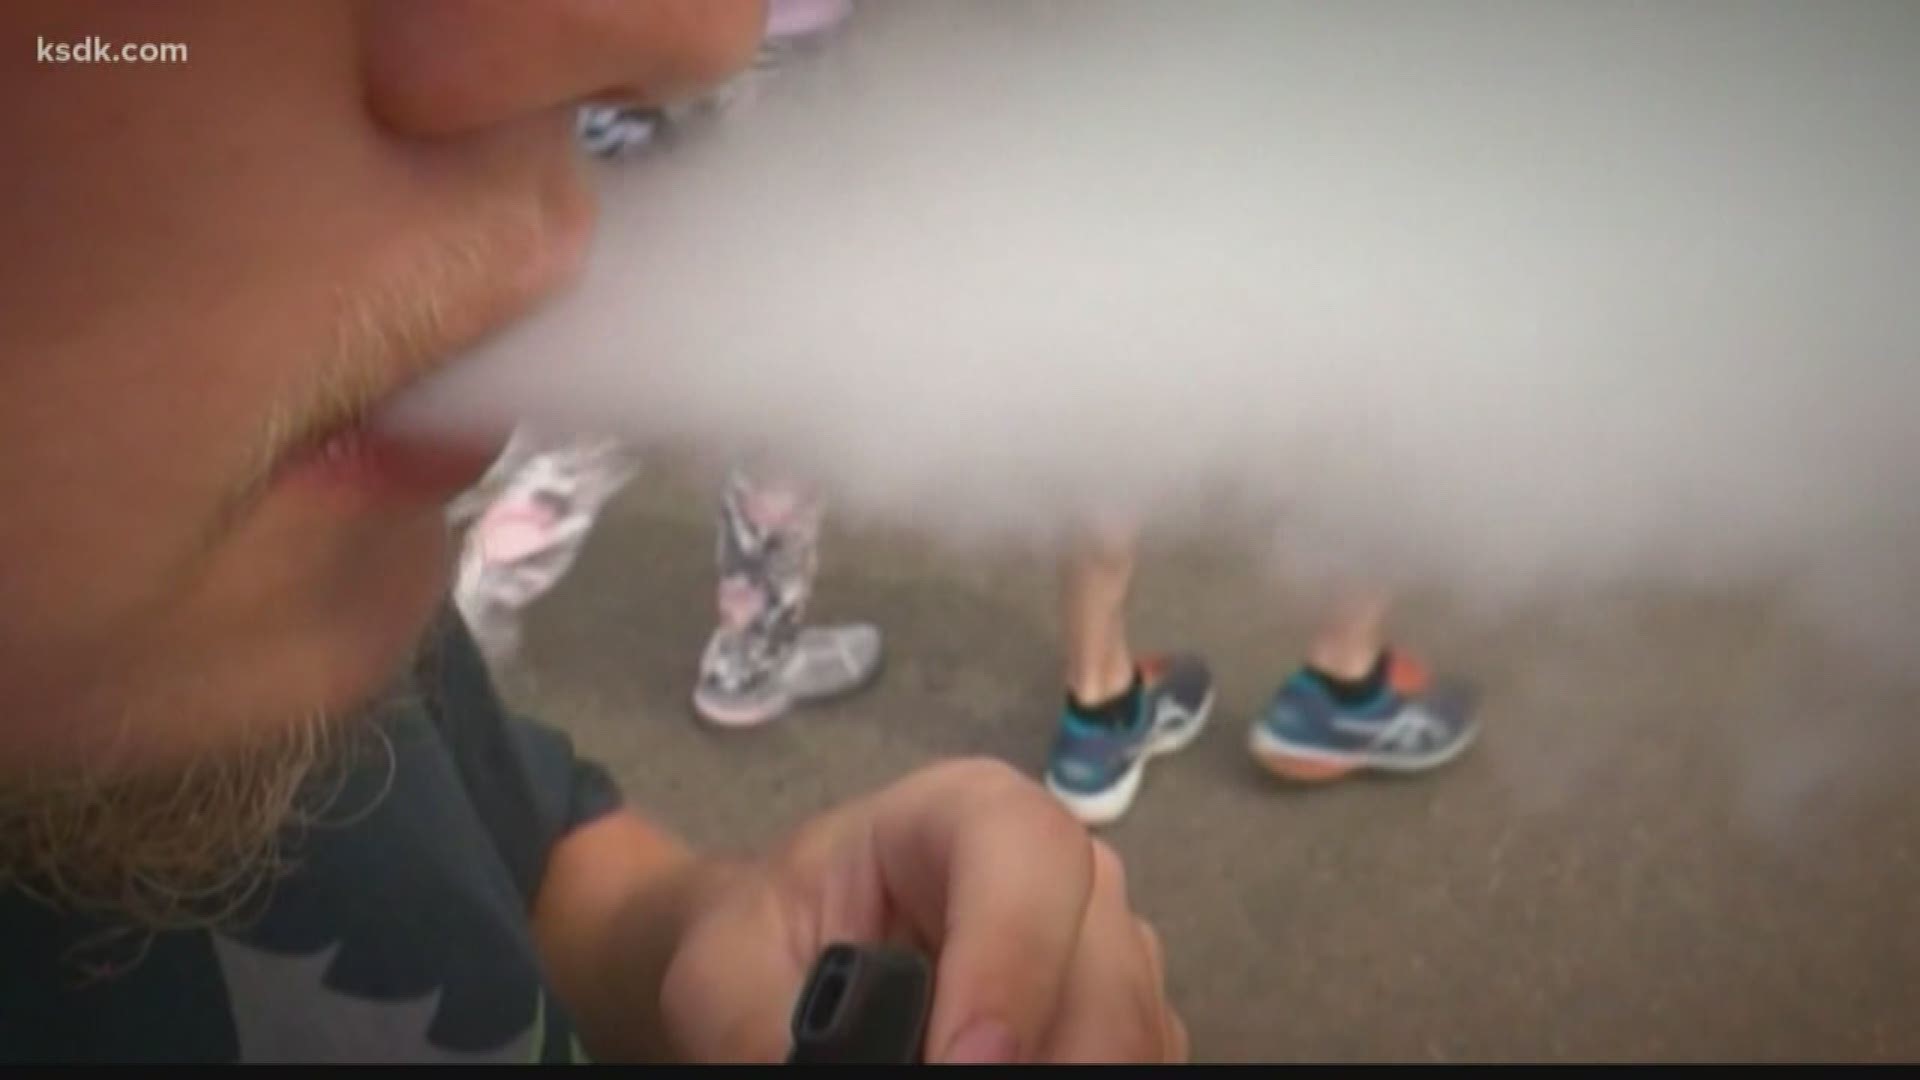 The governor is asking different state agencies to look into how vaping affects health, school kids, and public safety.